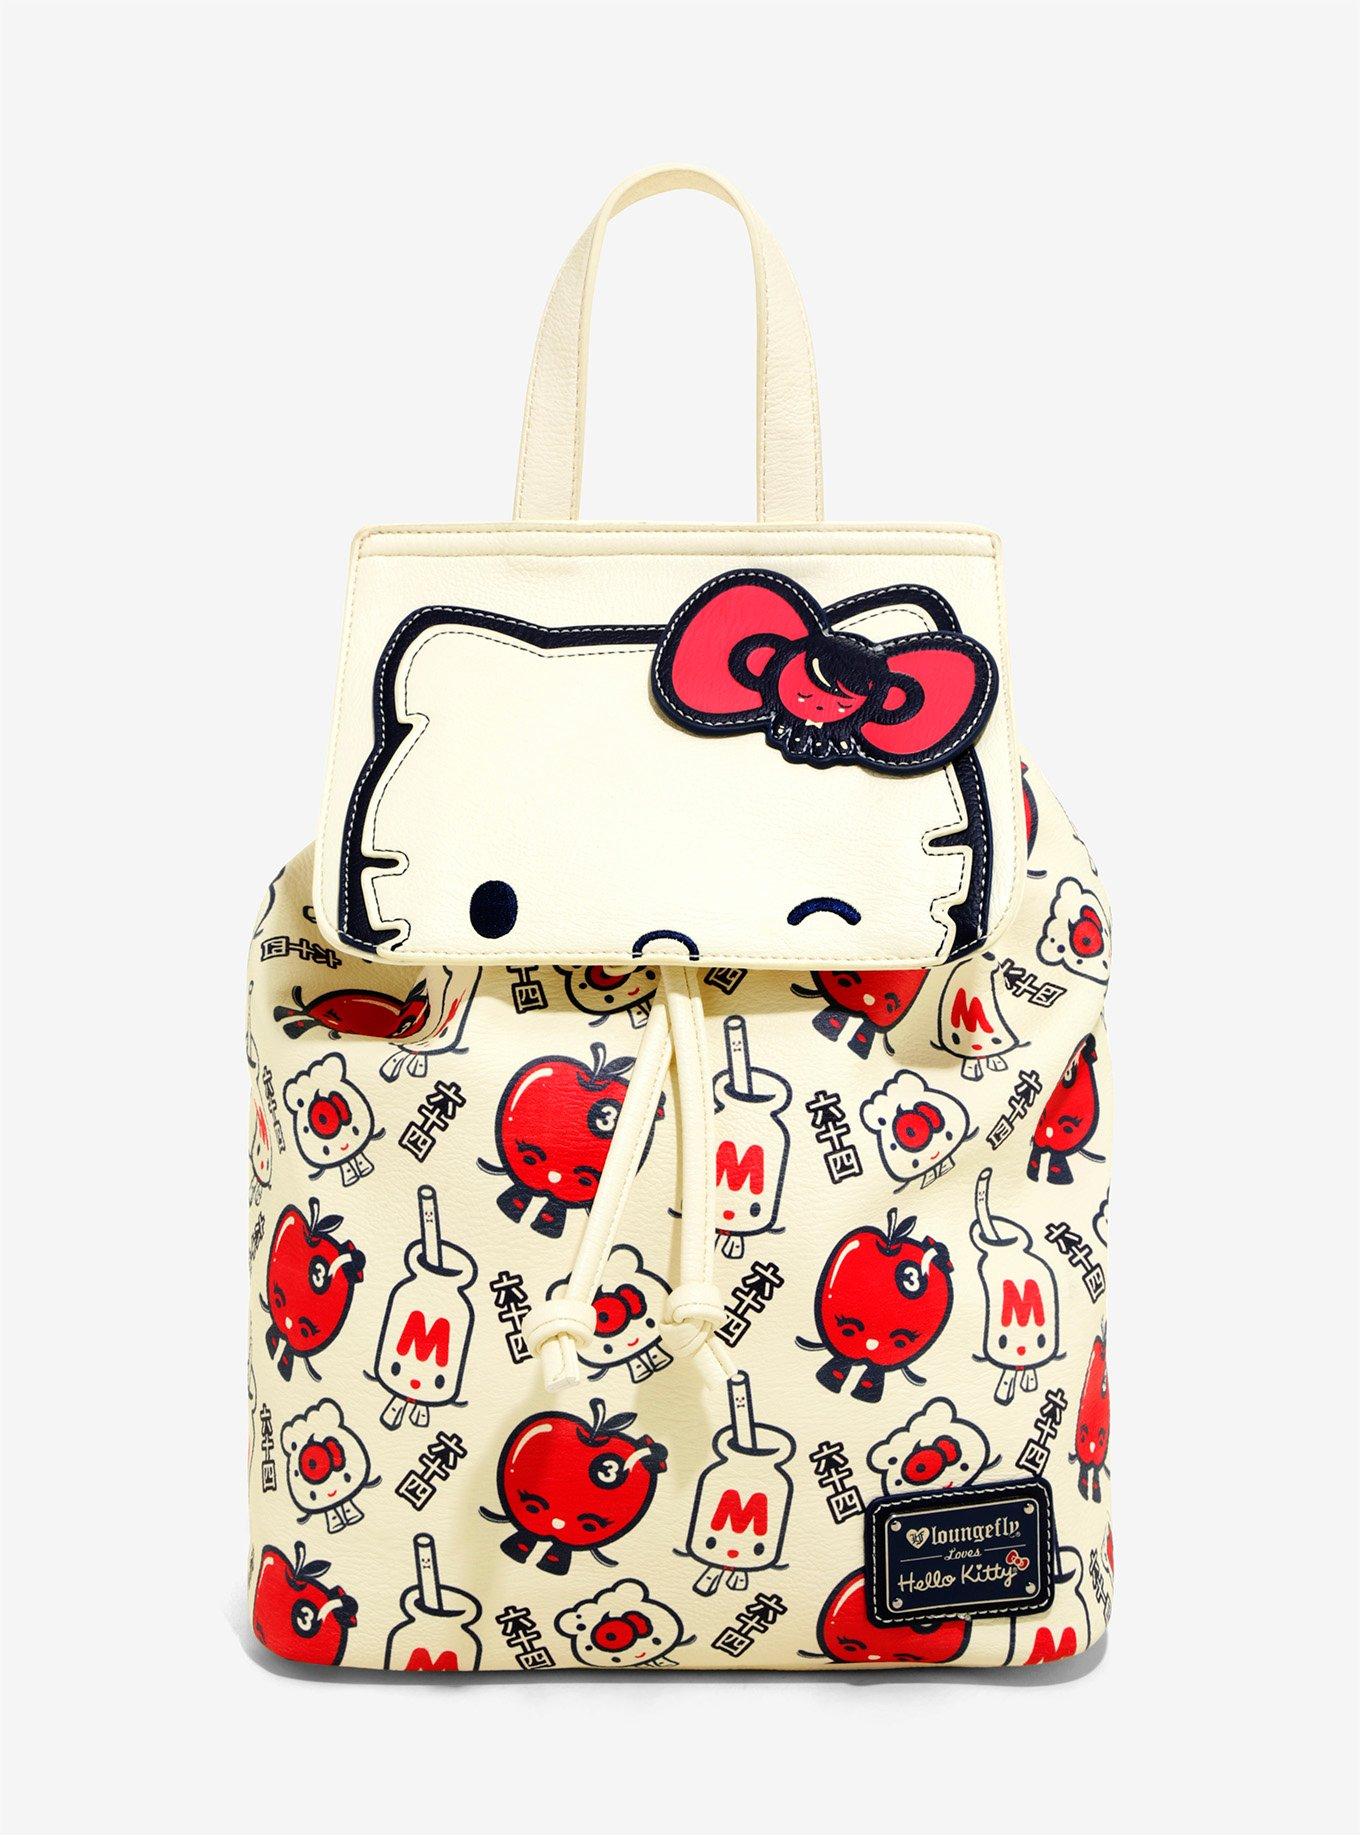 Hello Kitty Loungefly Backpack